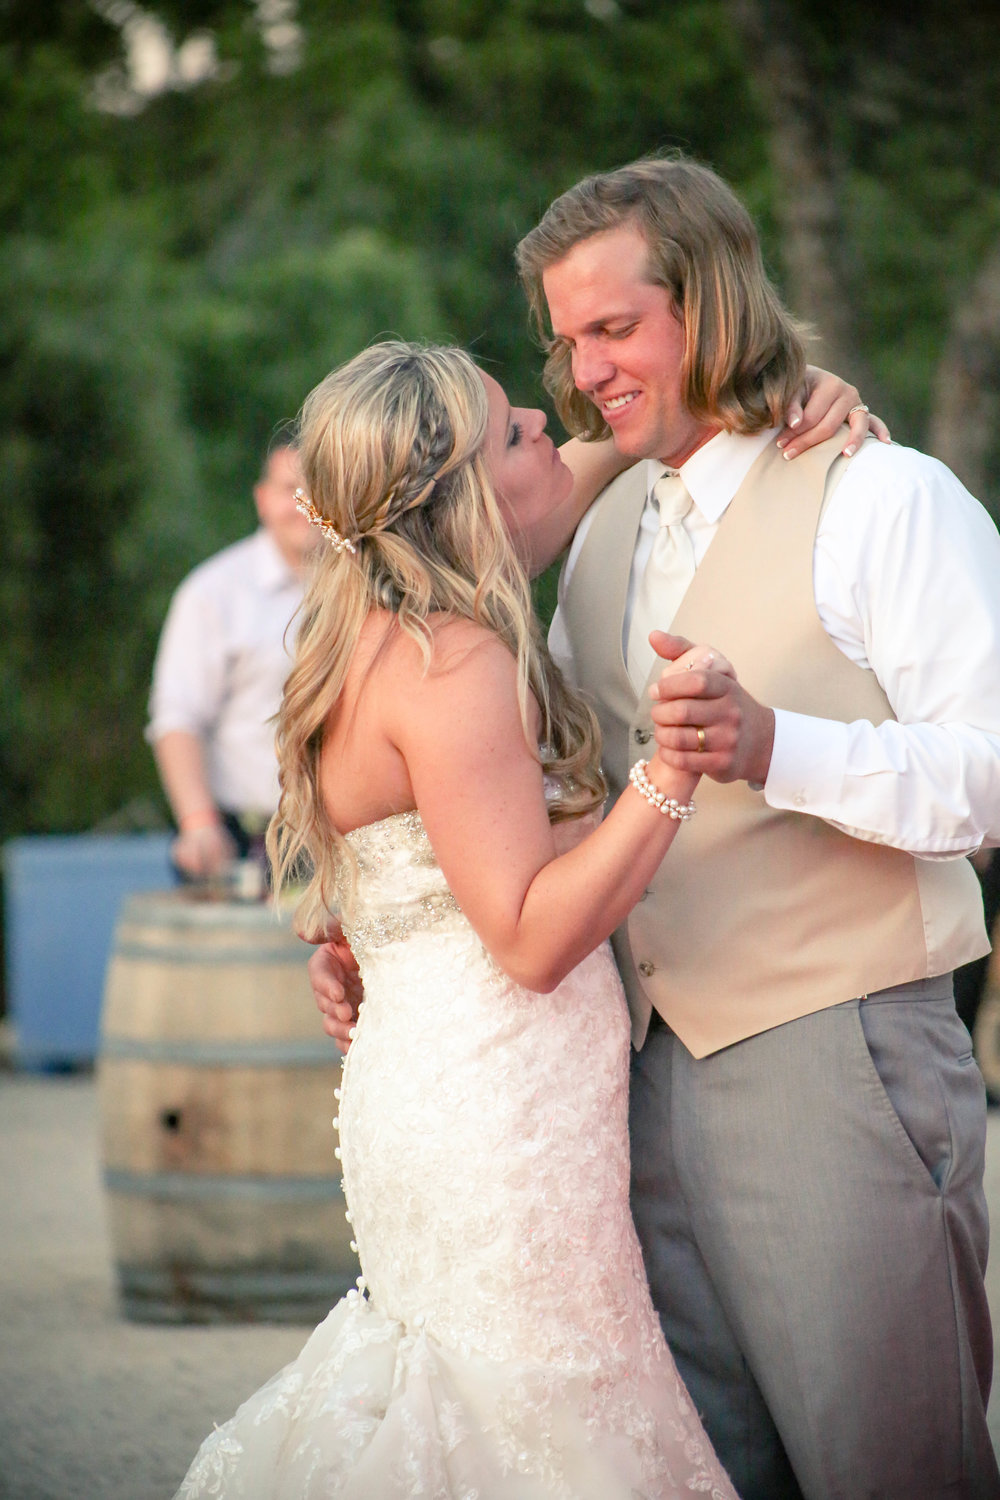 Wedding first dance at oak heart estate in paso robles california